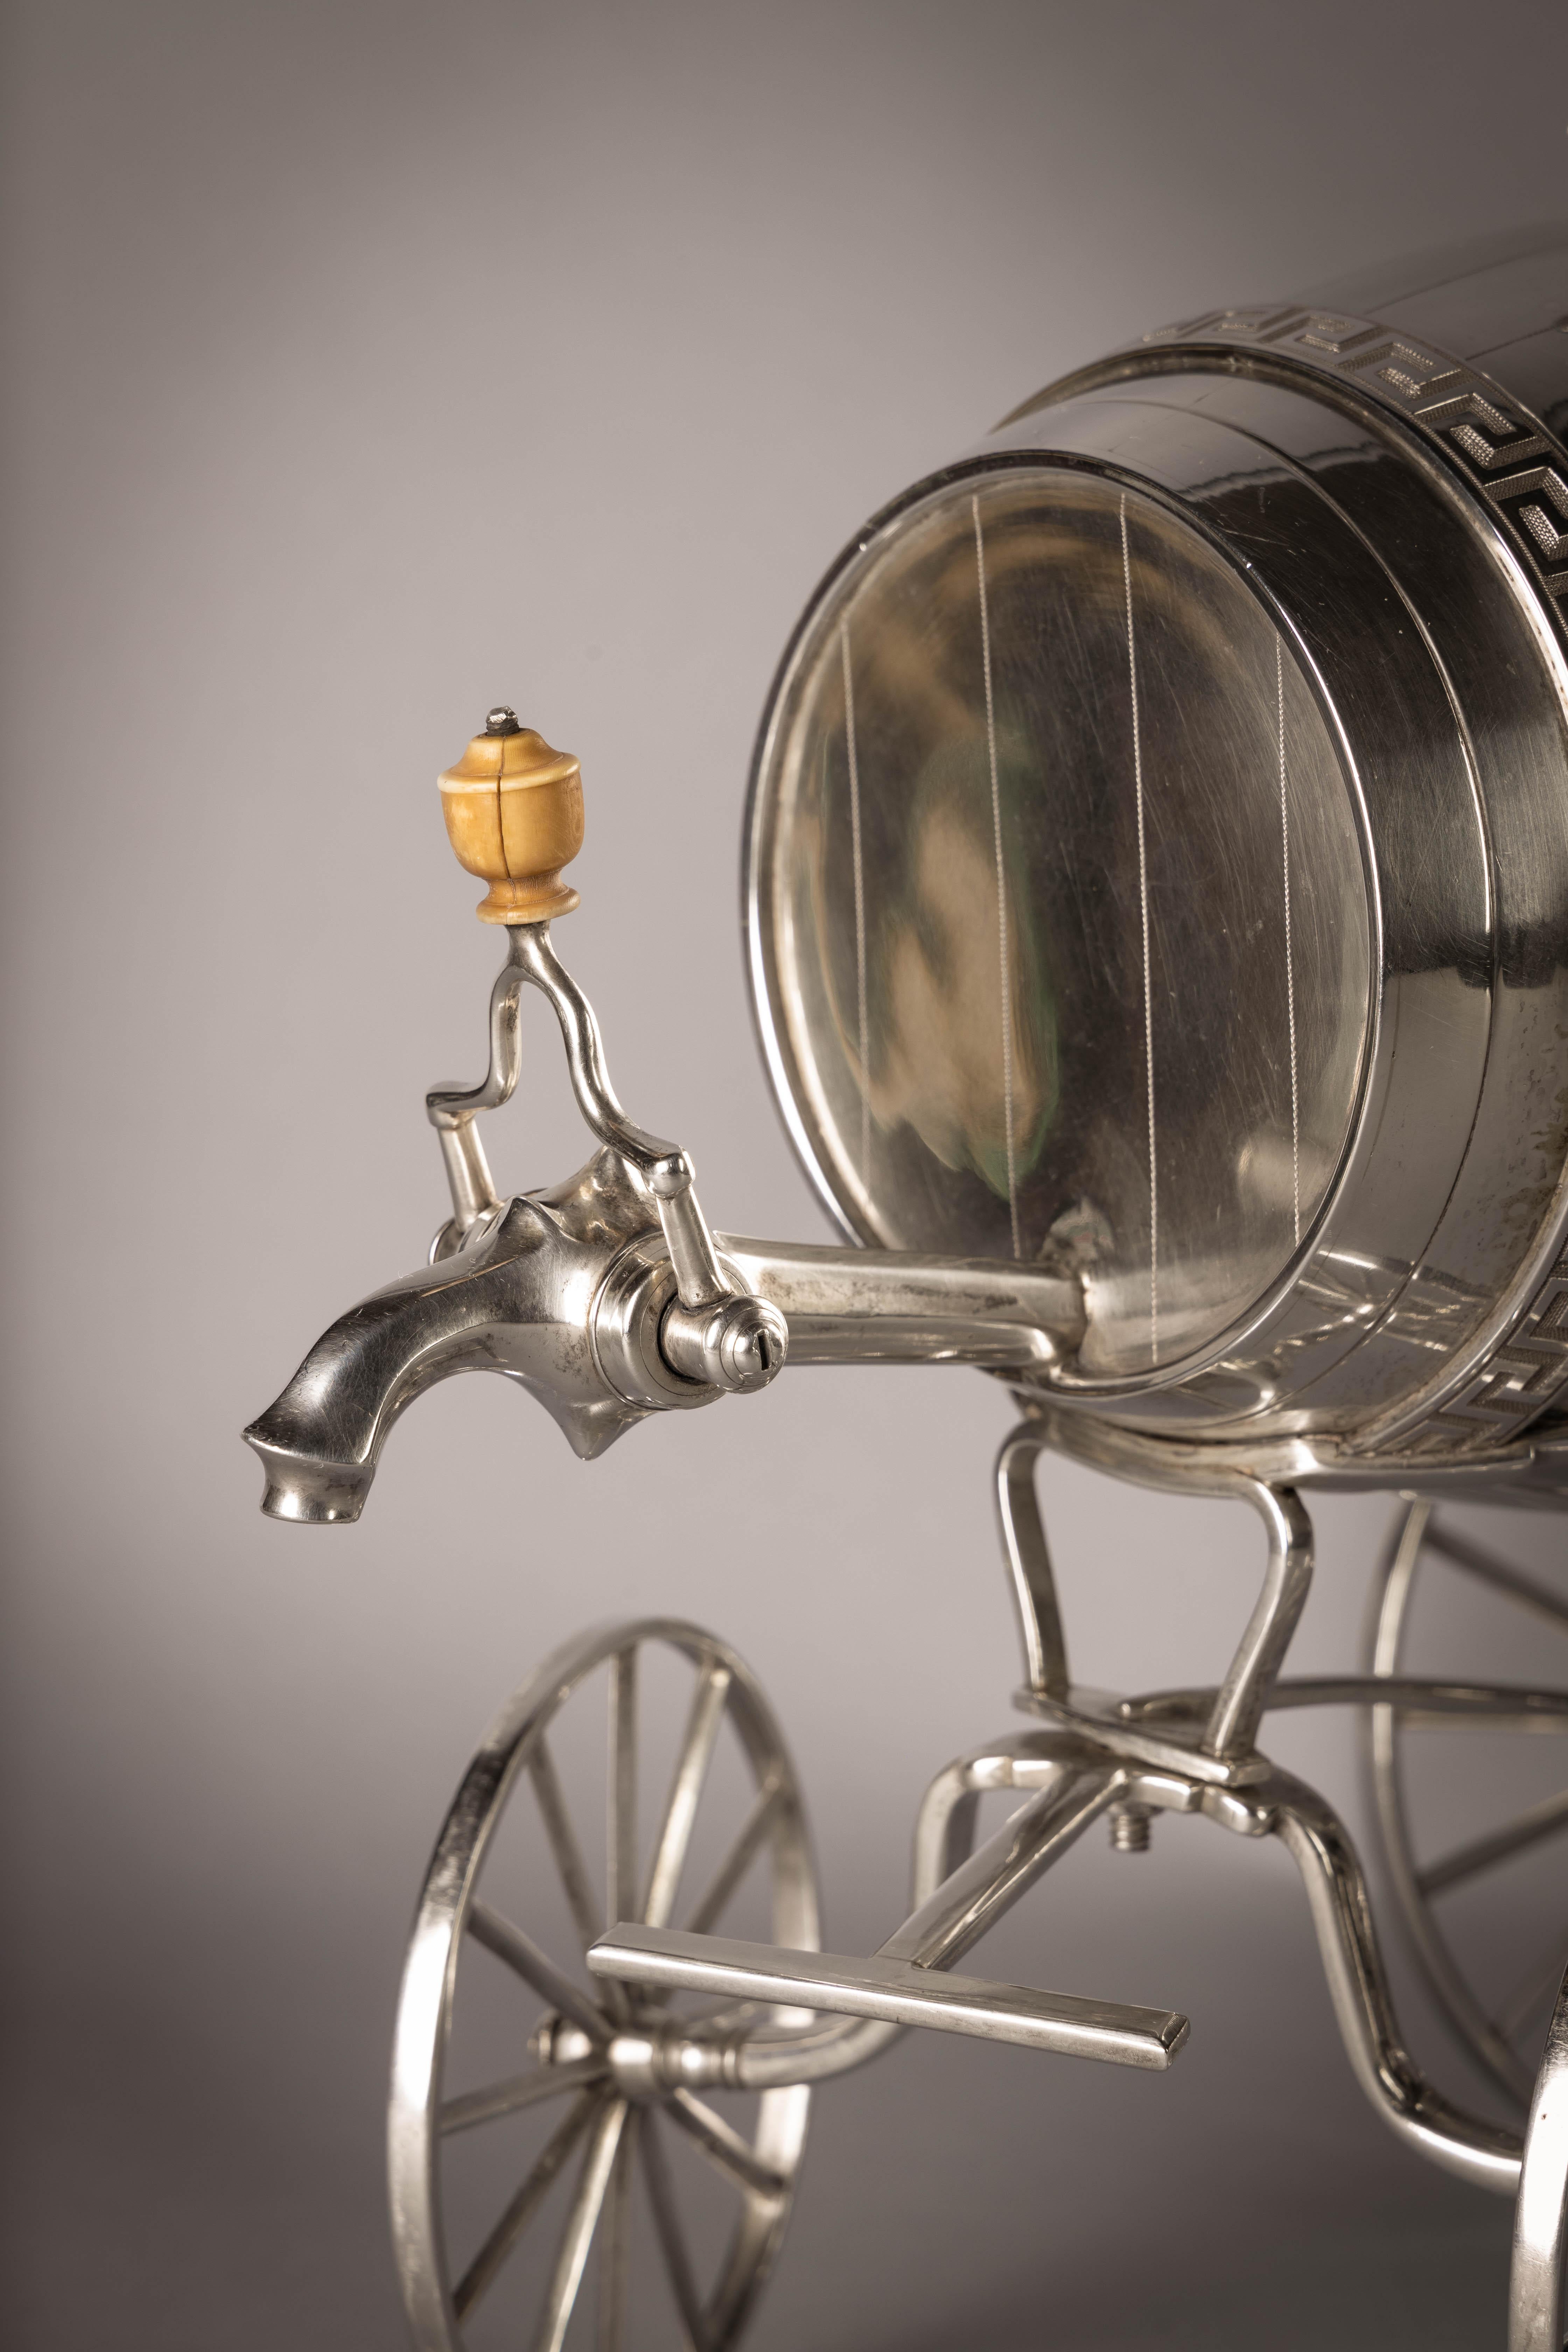 Modelled as a wine barrel on wheels with a detachable putti finial. Marked: London, 1807, Maker: William Burwash.